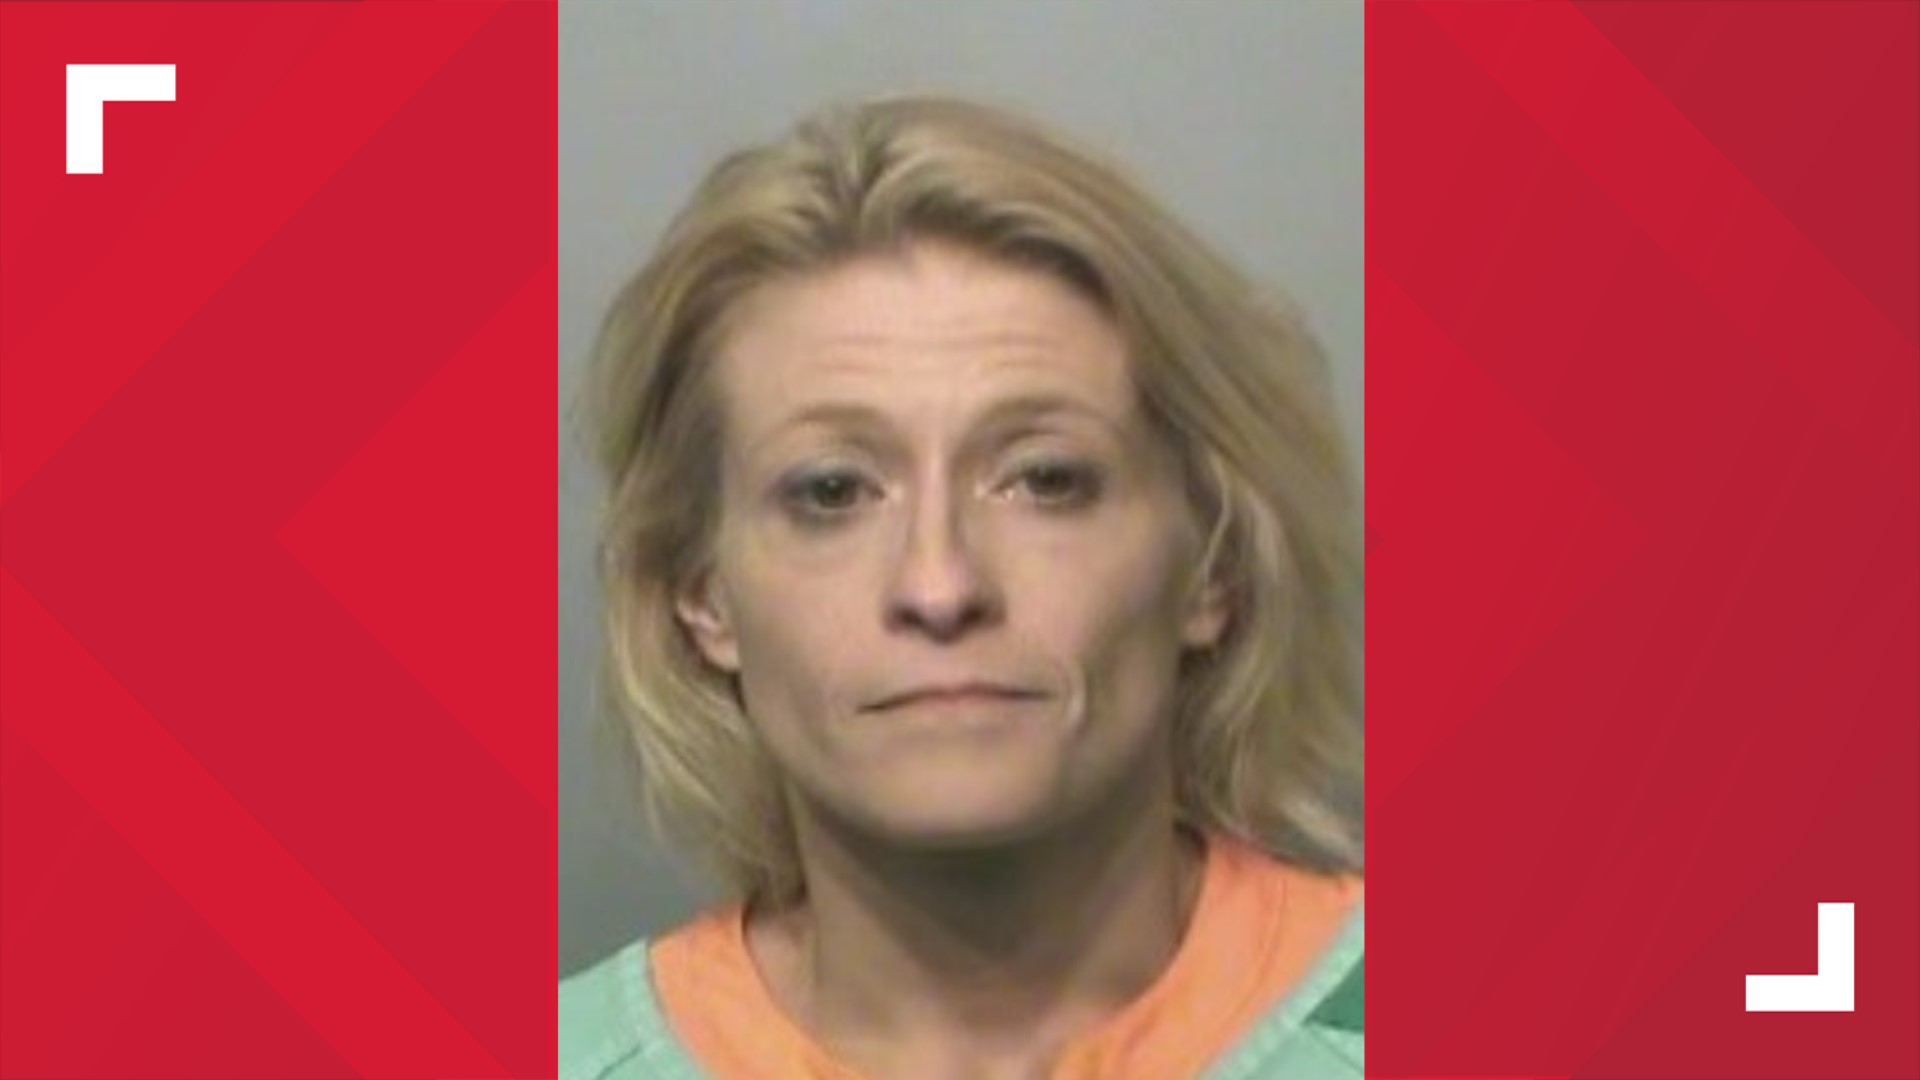 42-year-old Sherry Jacobs is one of two people charged in connection to "fraudulently obtaining COVID Emergency Rental Assistance funds," Des Moines police say.